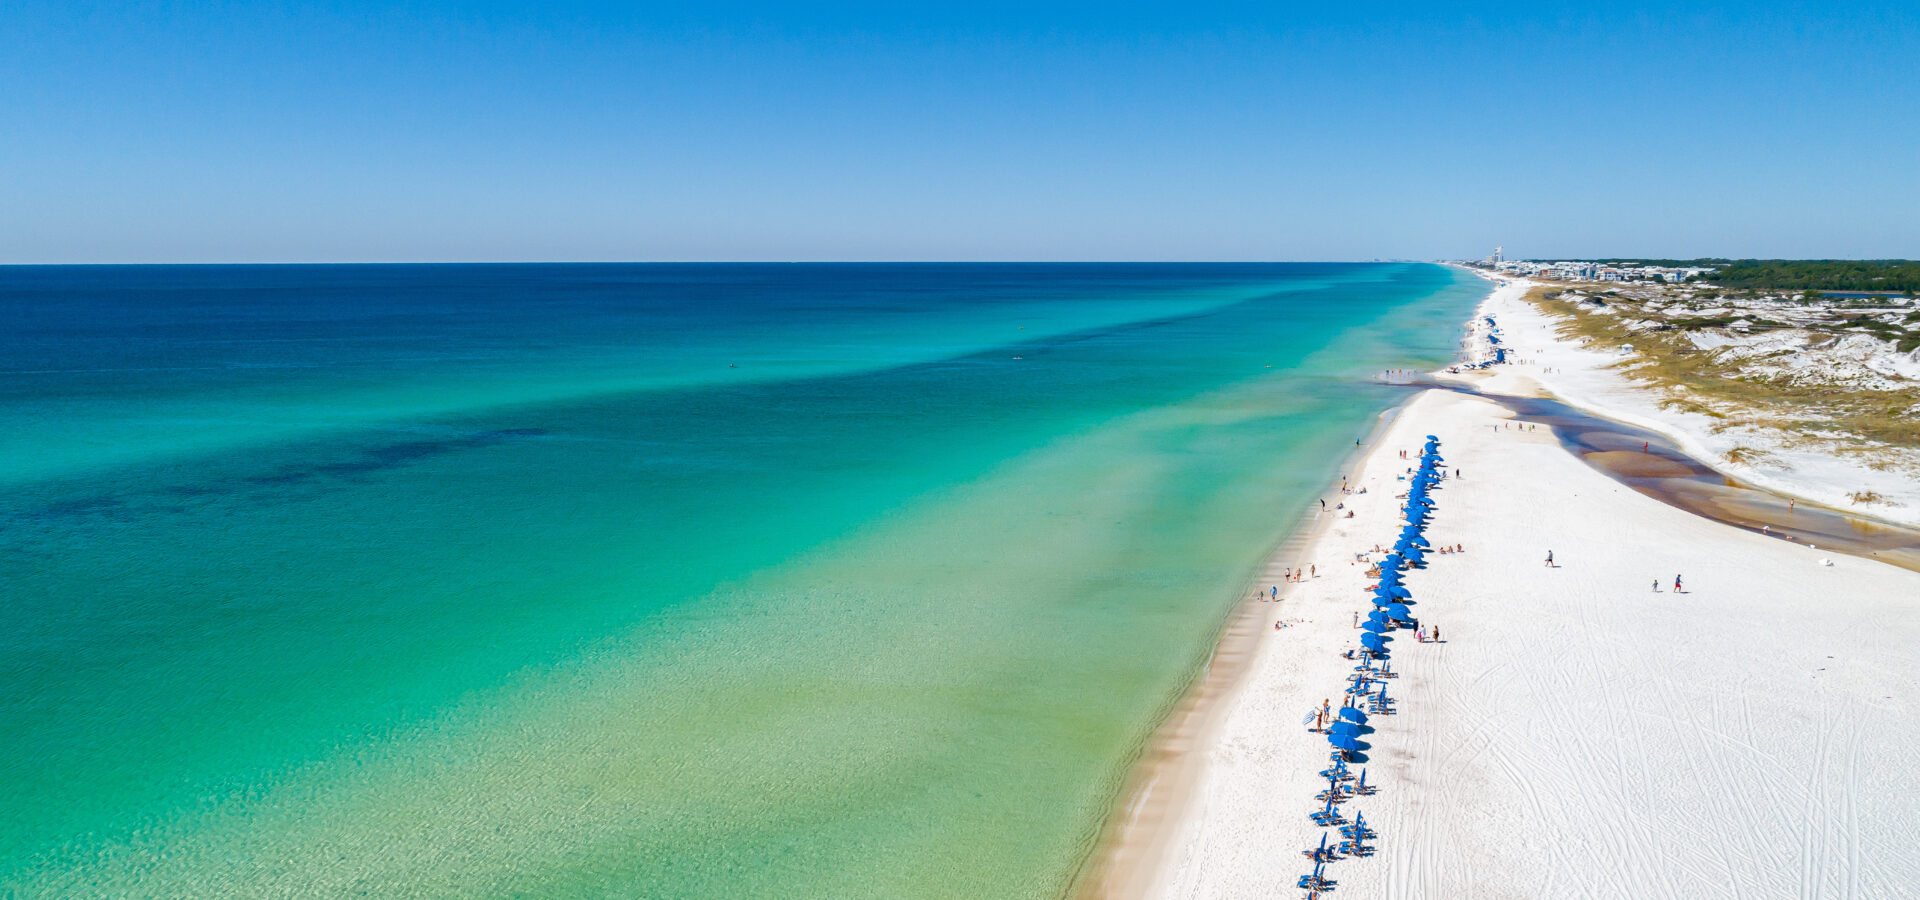 Bright blue beach chairs and umbrellas lined perfectly in a row on the white sandy shoreline of Watersound Beach, overlooking the beautiful emerald green and blue waters of the Gulf of Mexico